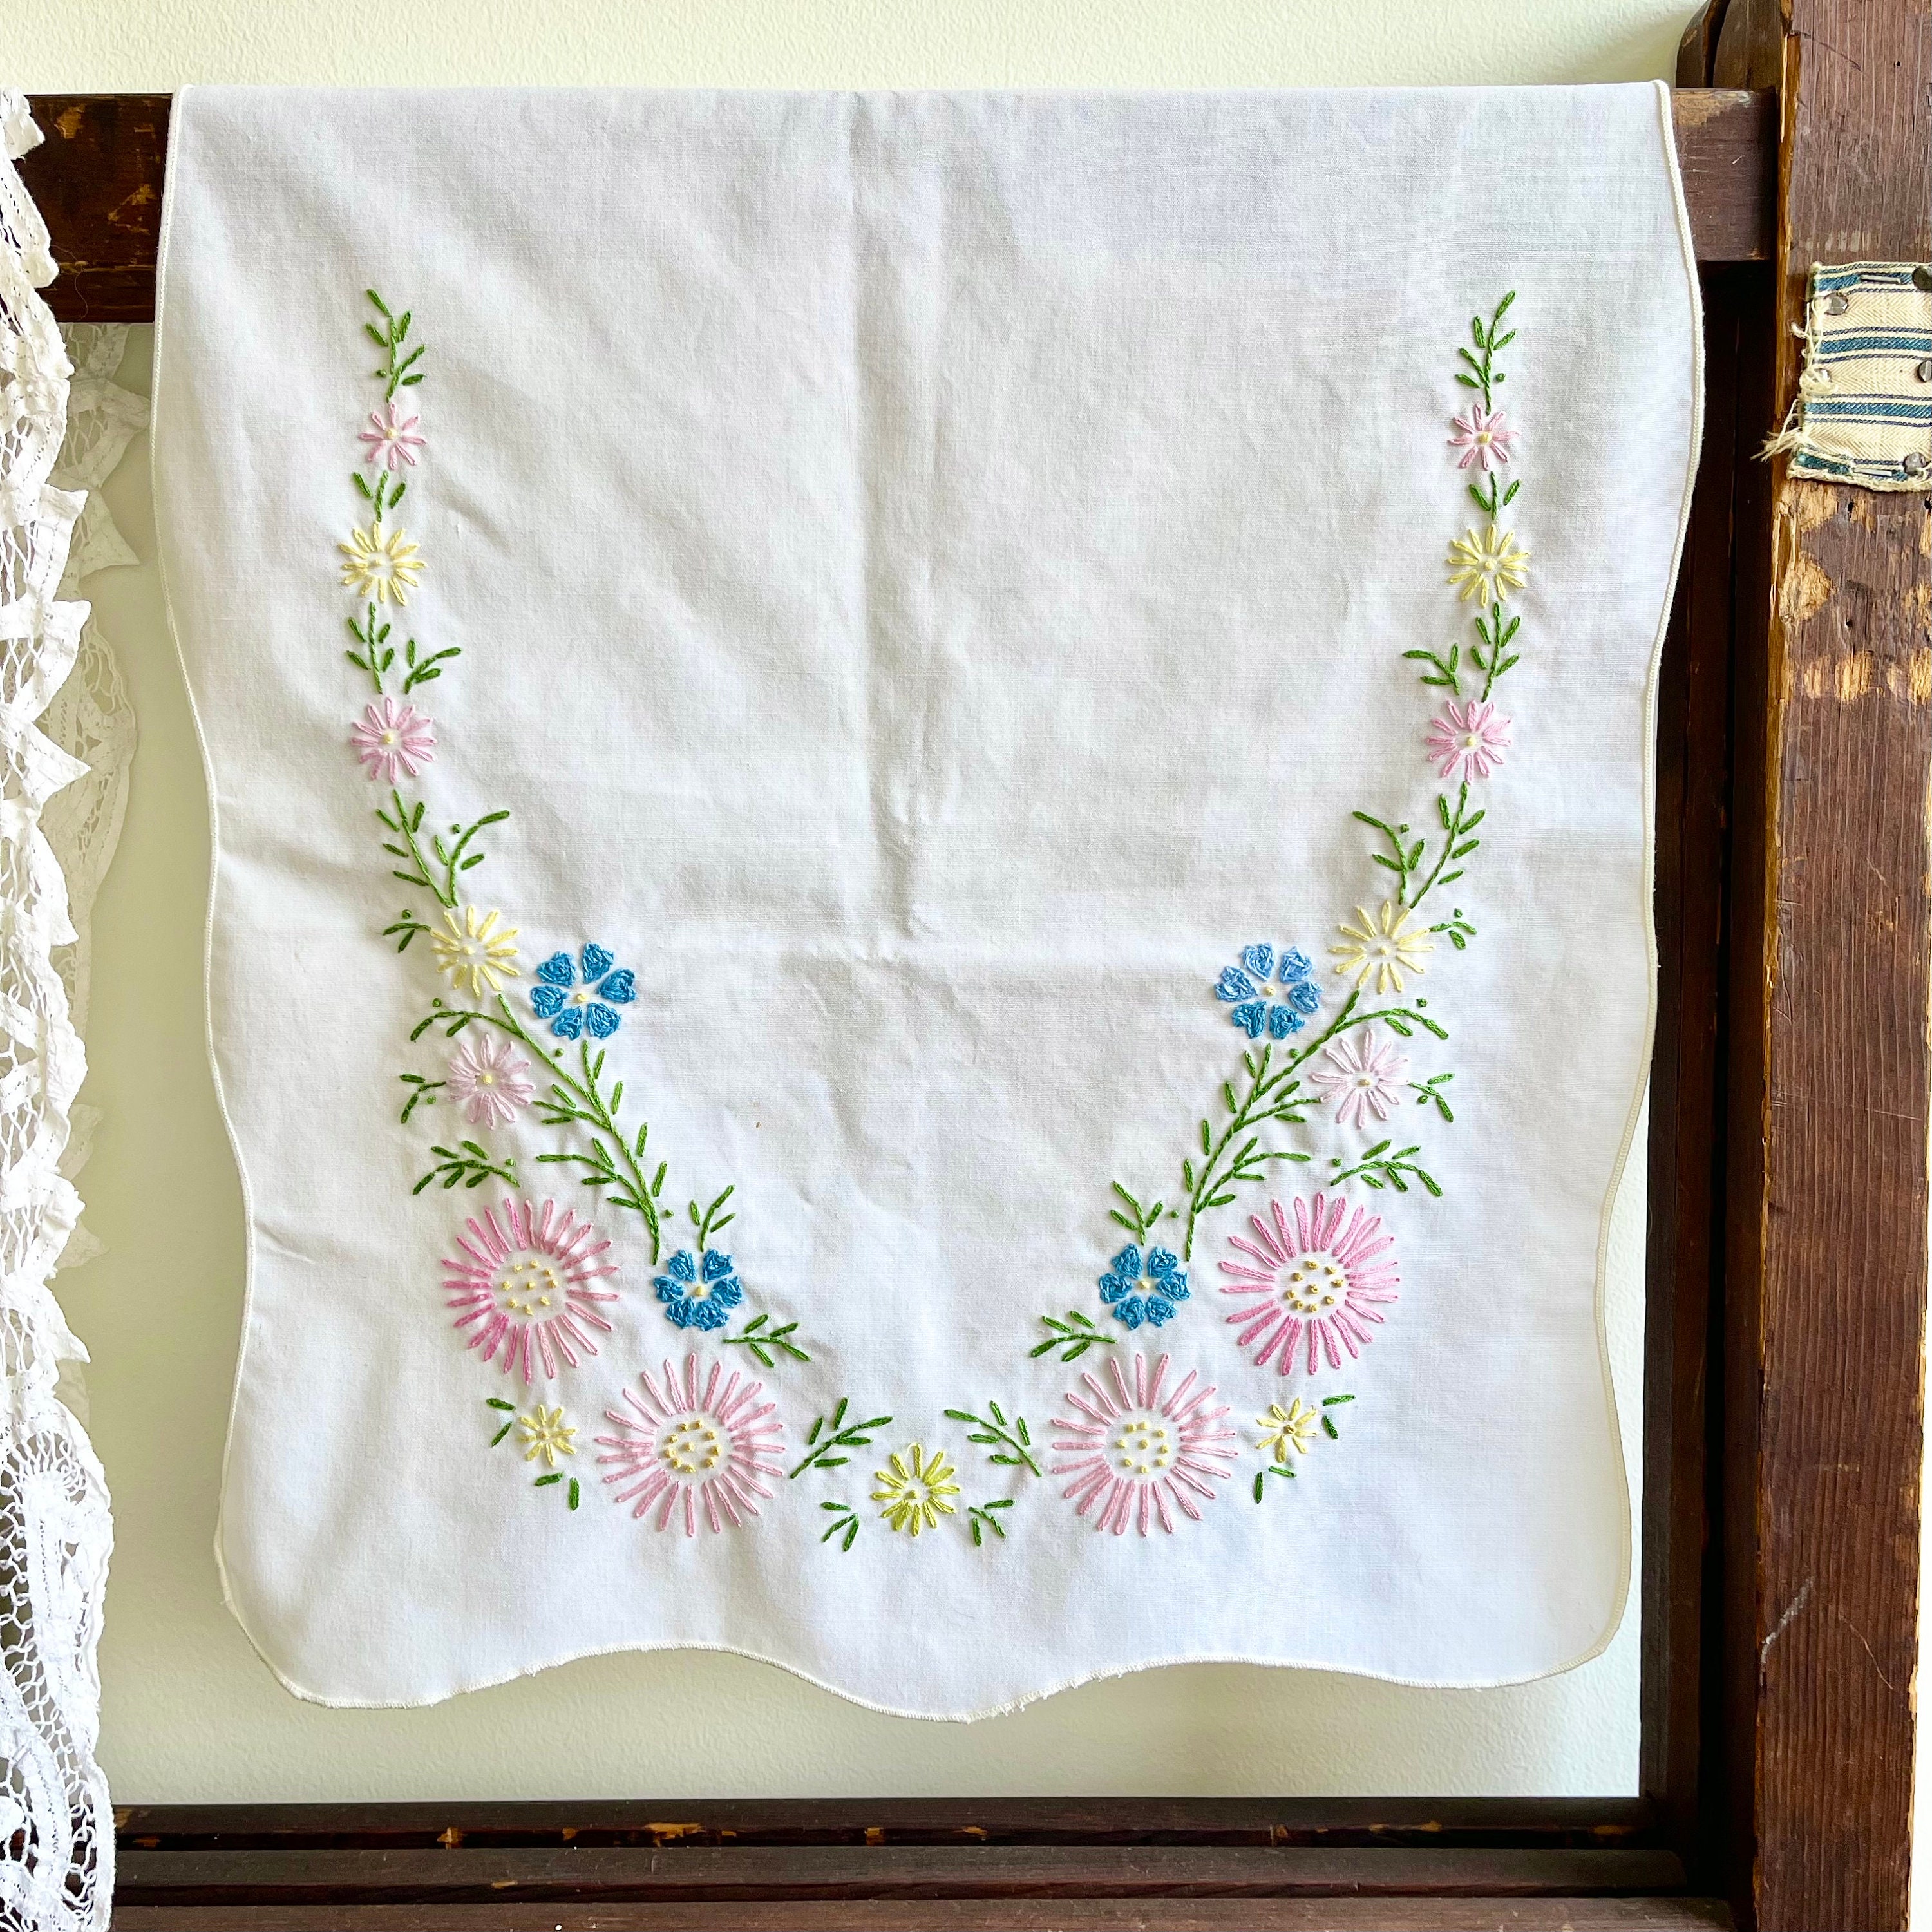 Embroidered Flower Table Runner Hollow Lace Daisy Dresser Scarf Table Linen 